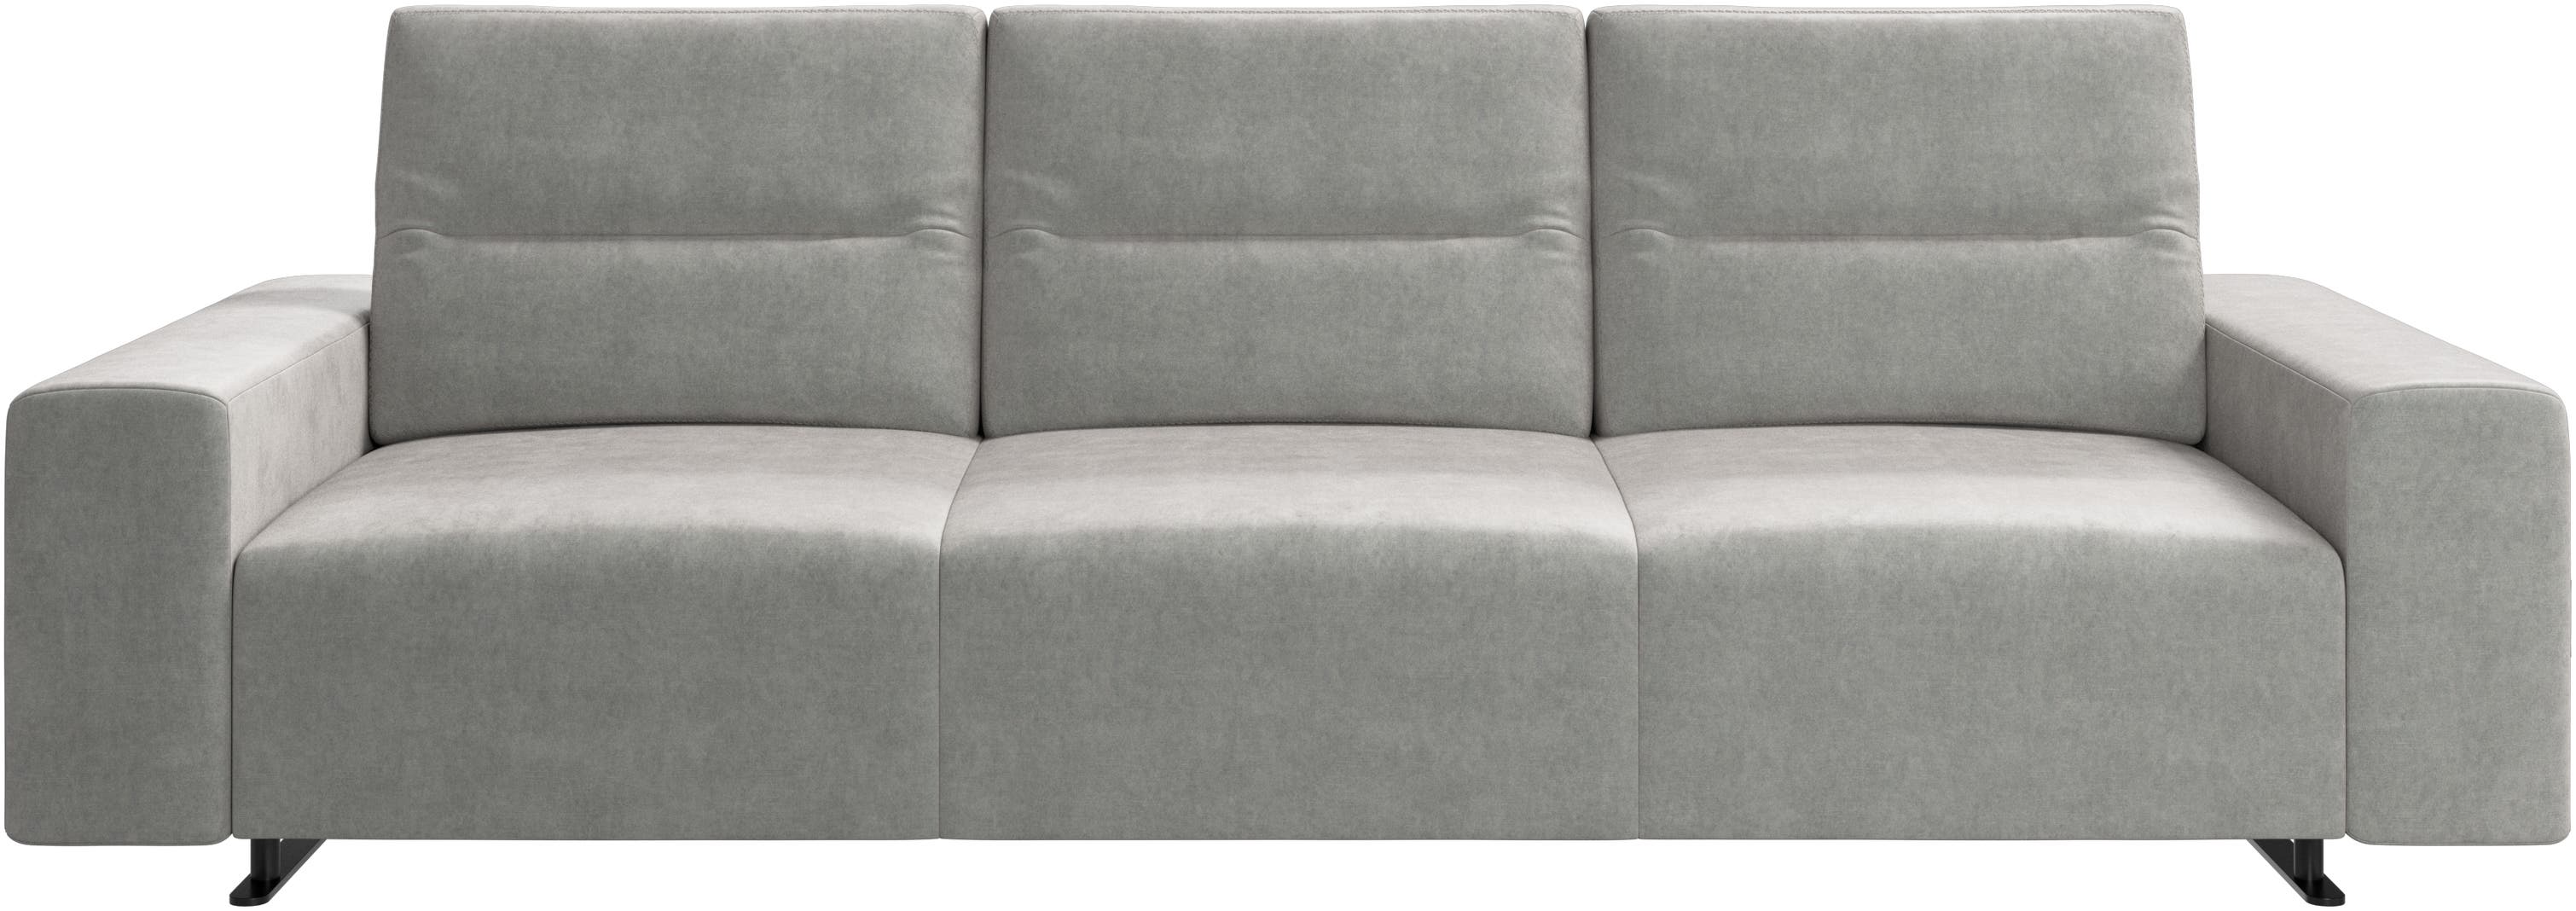 Hampton sofa with adjustable back and storage on the left side